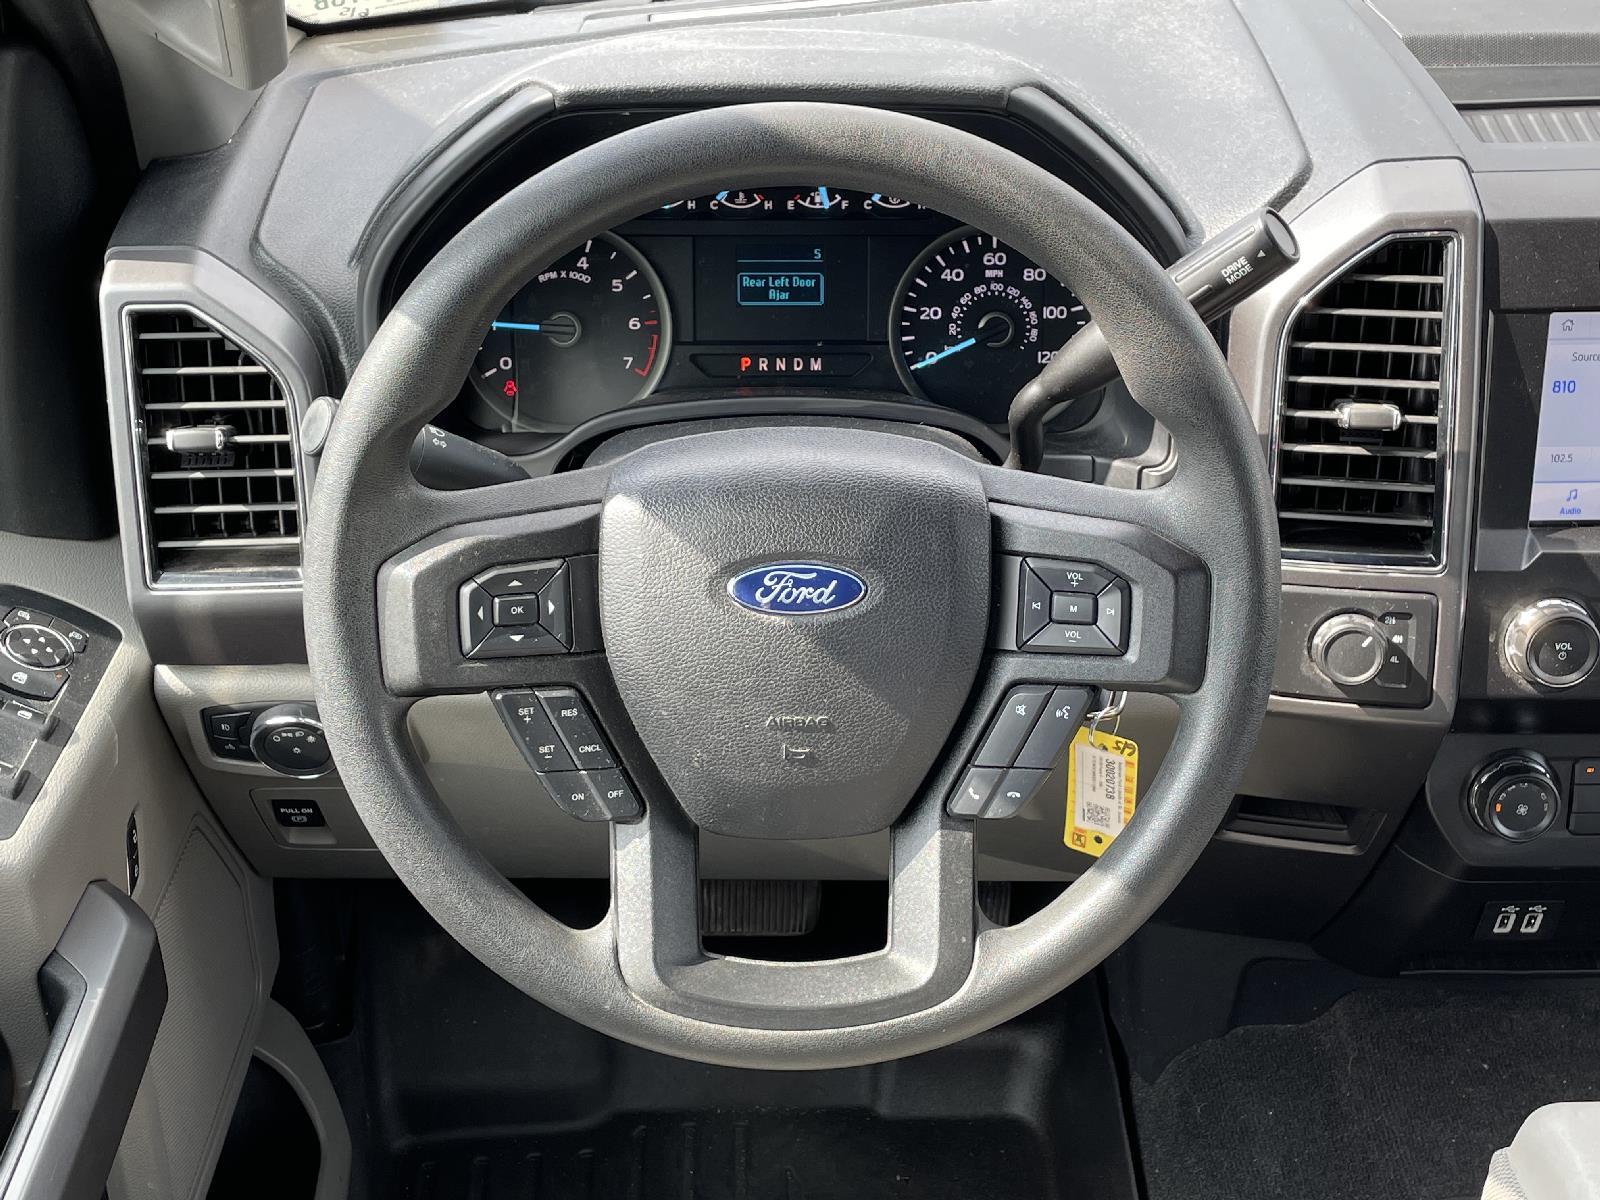 Used 2019 Ford F-150 XLT Crew Cab Truck for sale in St Joseph MO